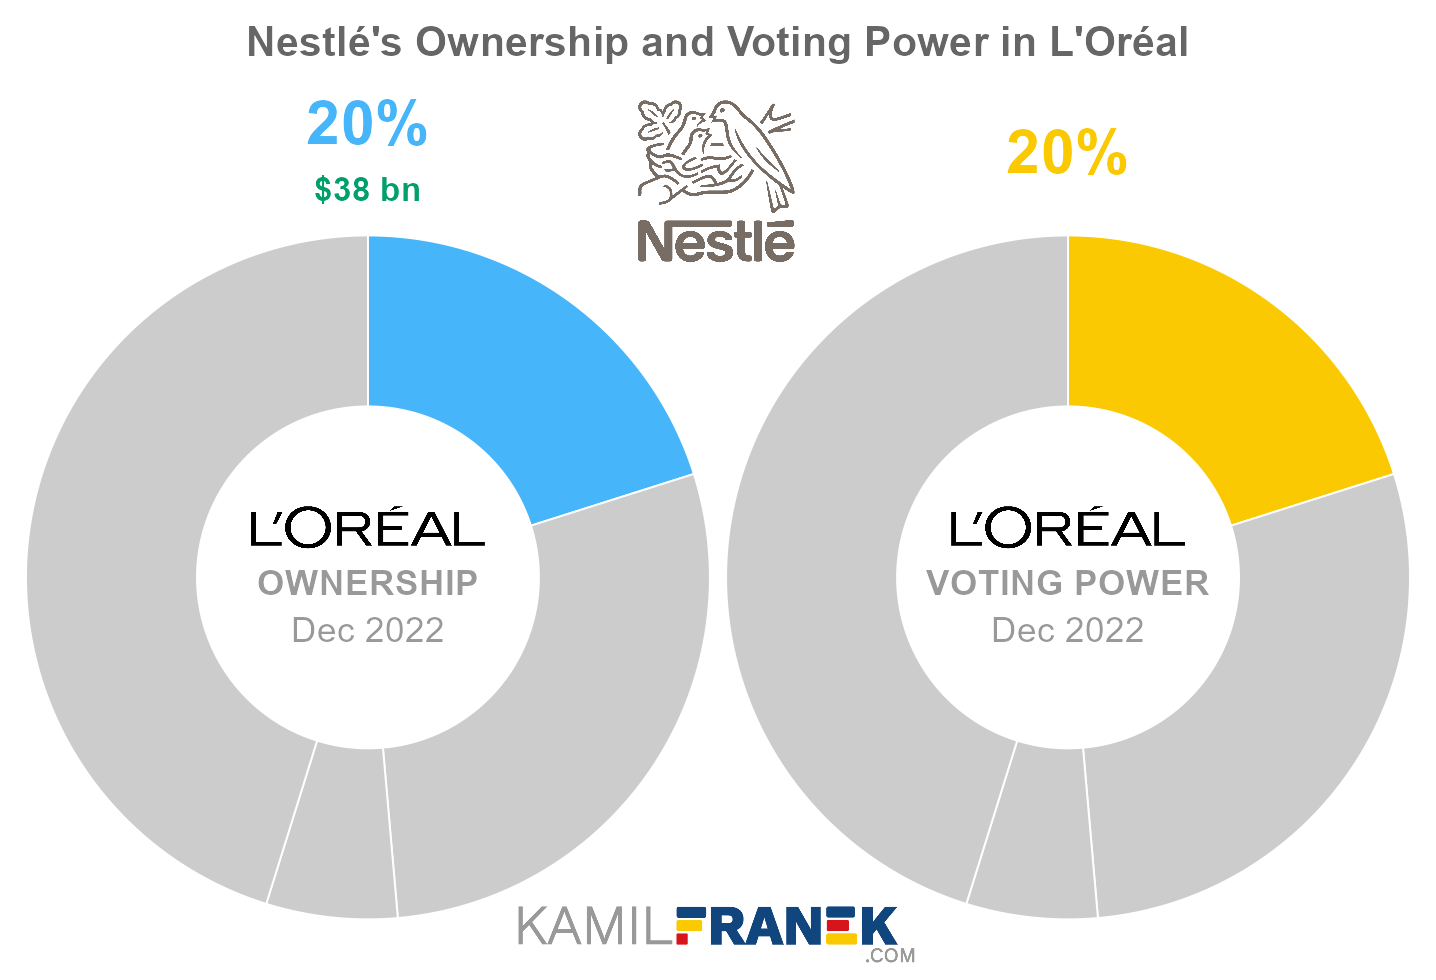 Nestlé's share ownership and voting power in L'Oréal (chart)